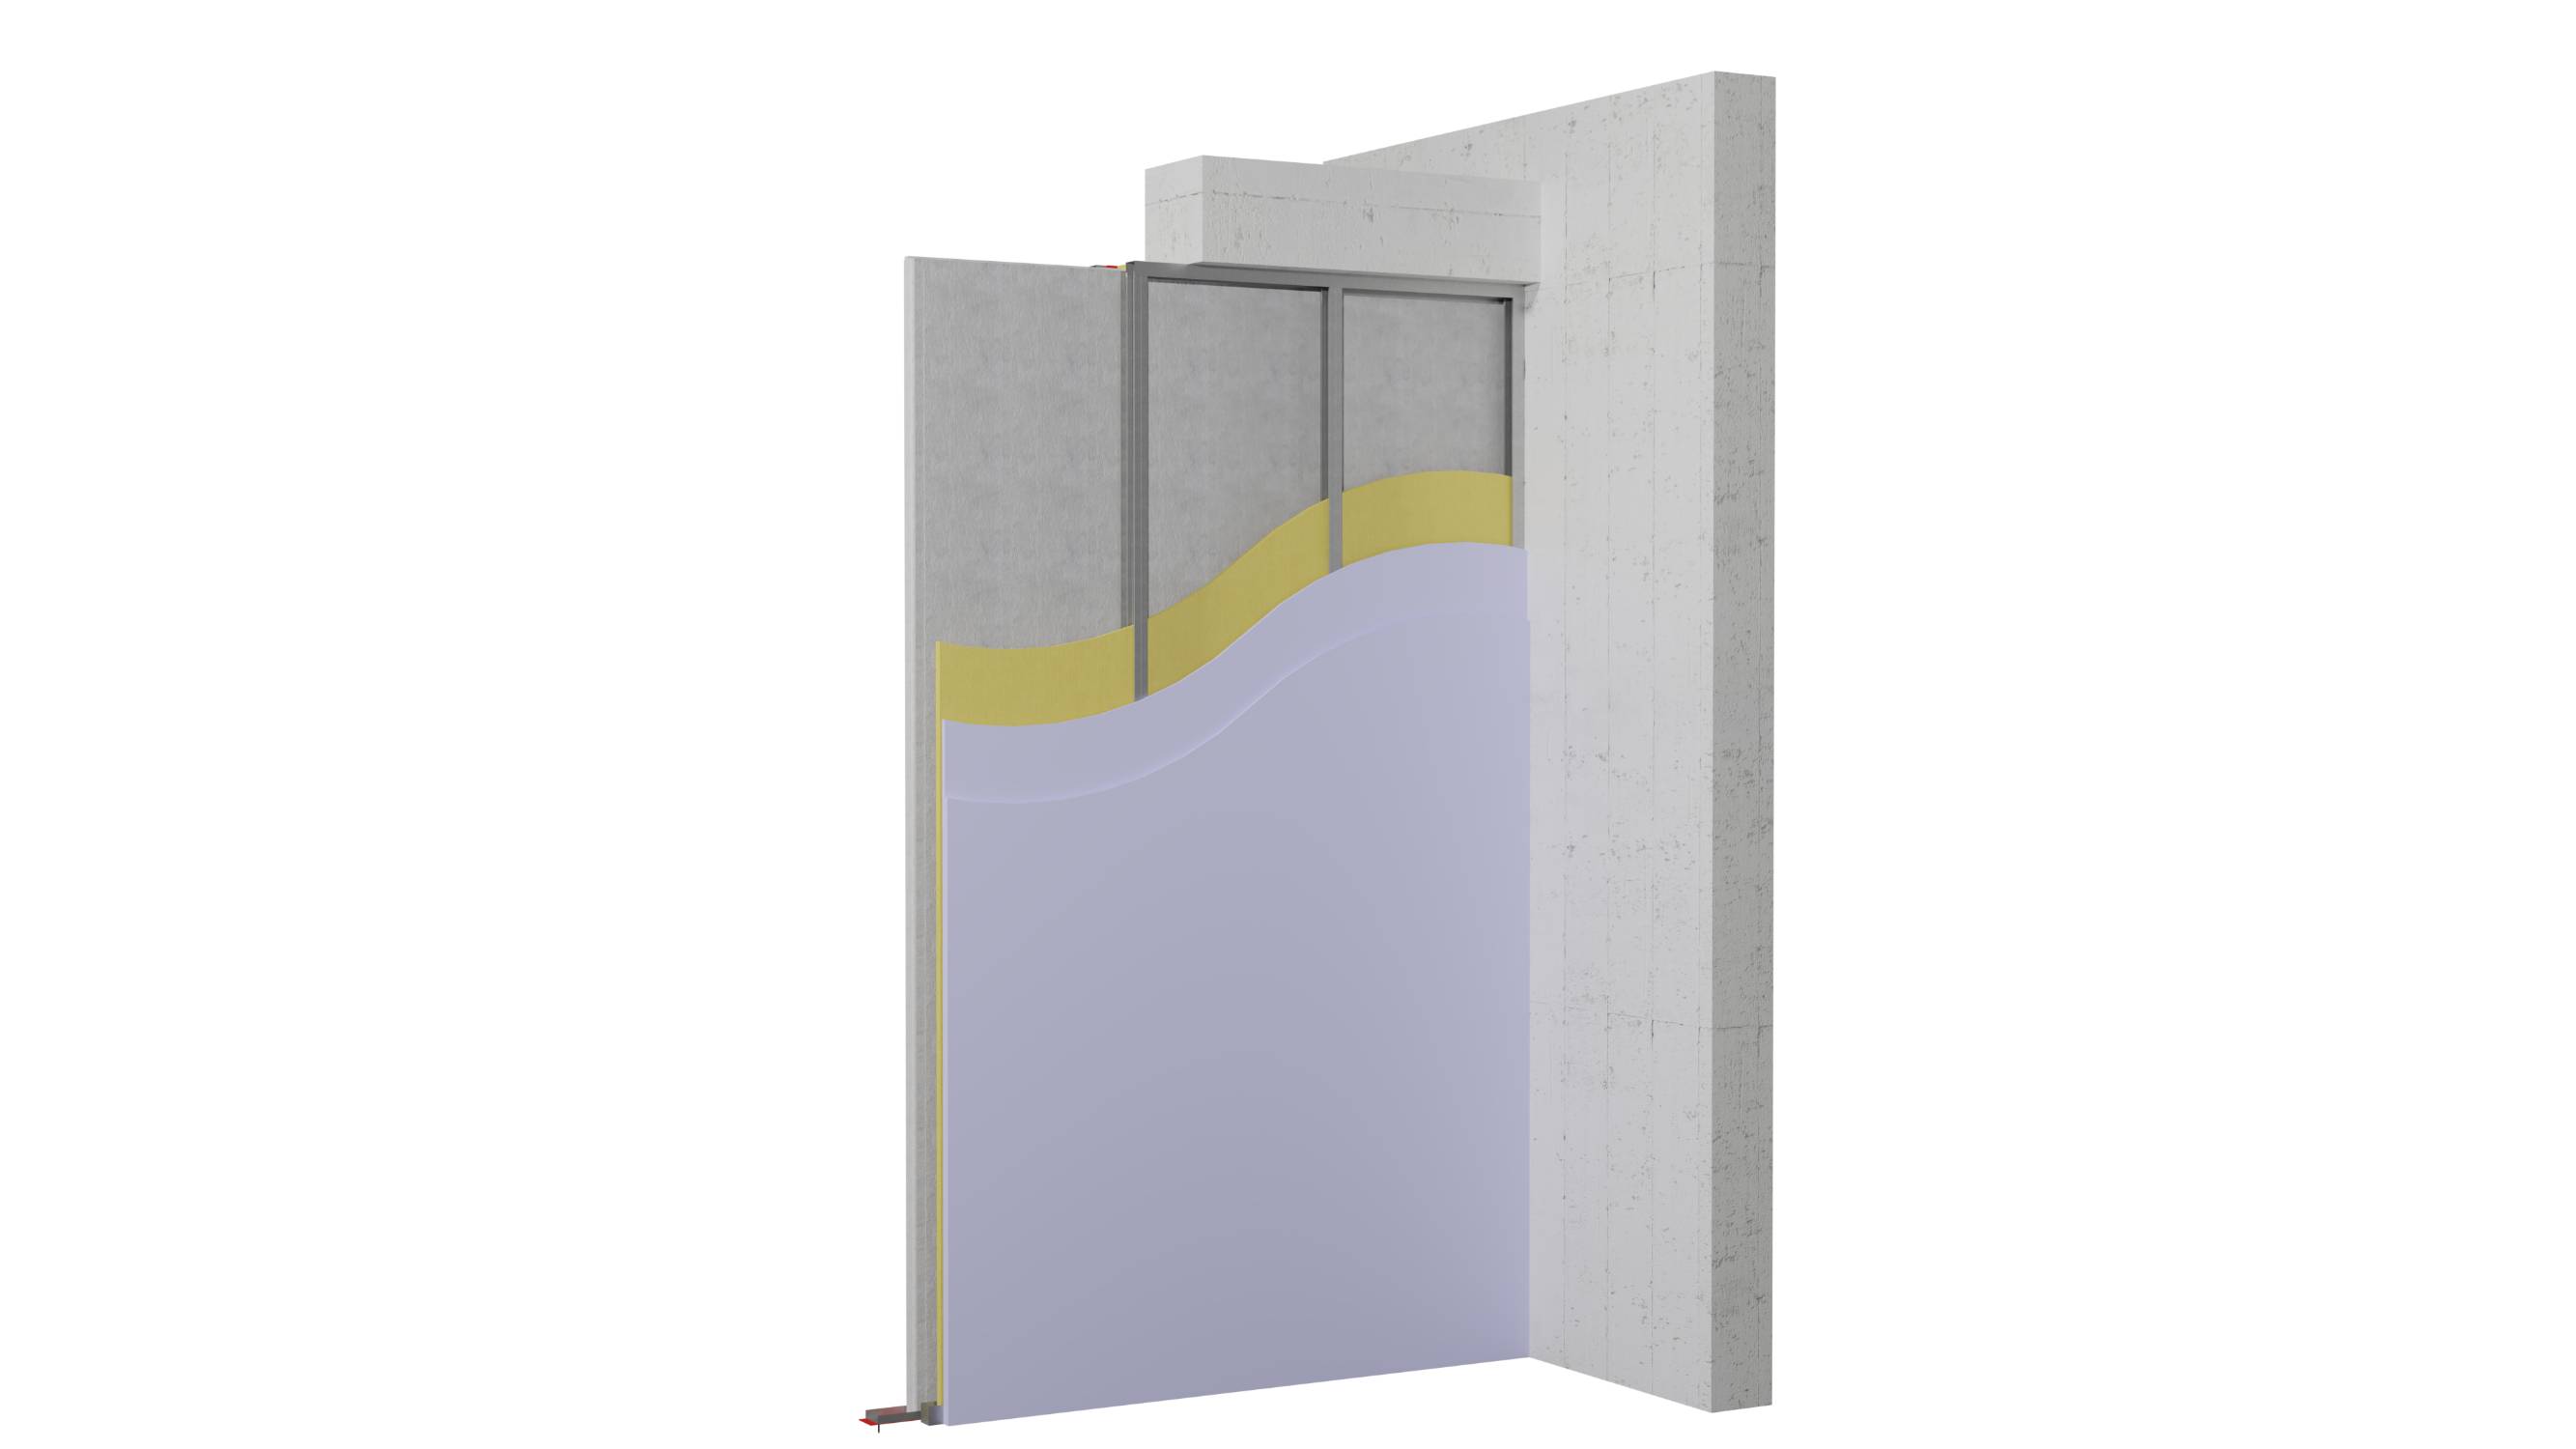 Hybrid Specwall HB001 (Acoustic & fire rated wall panel systems for internal separating walls) - Lightweight Concrete Panel